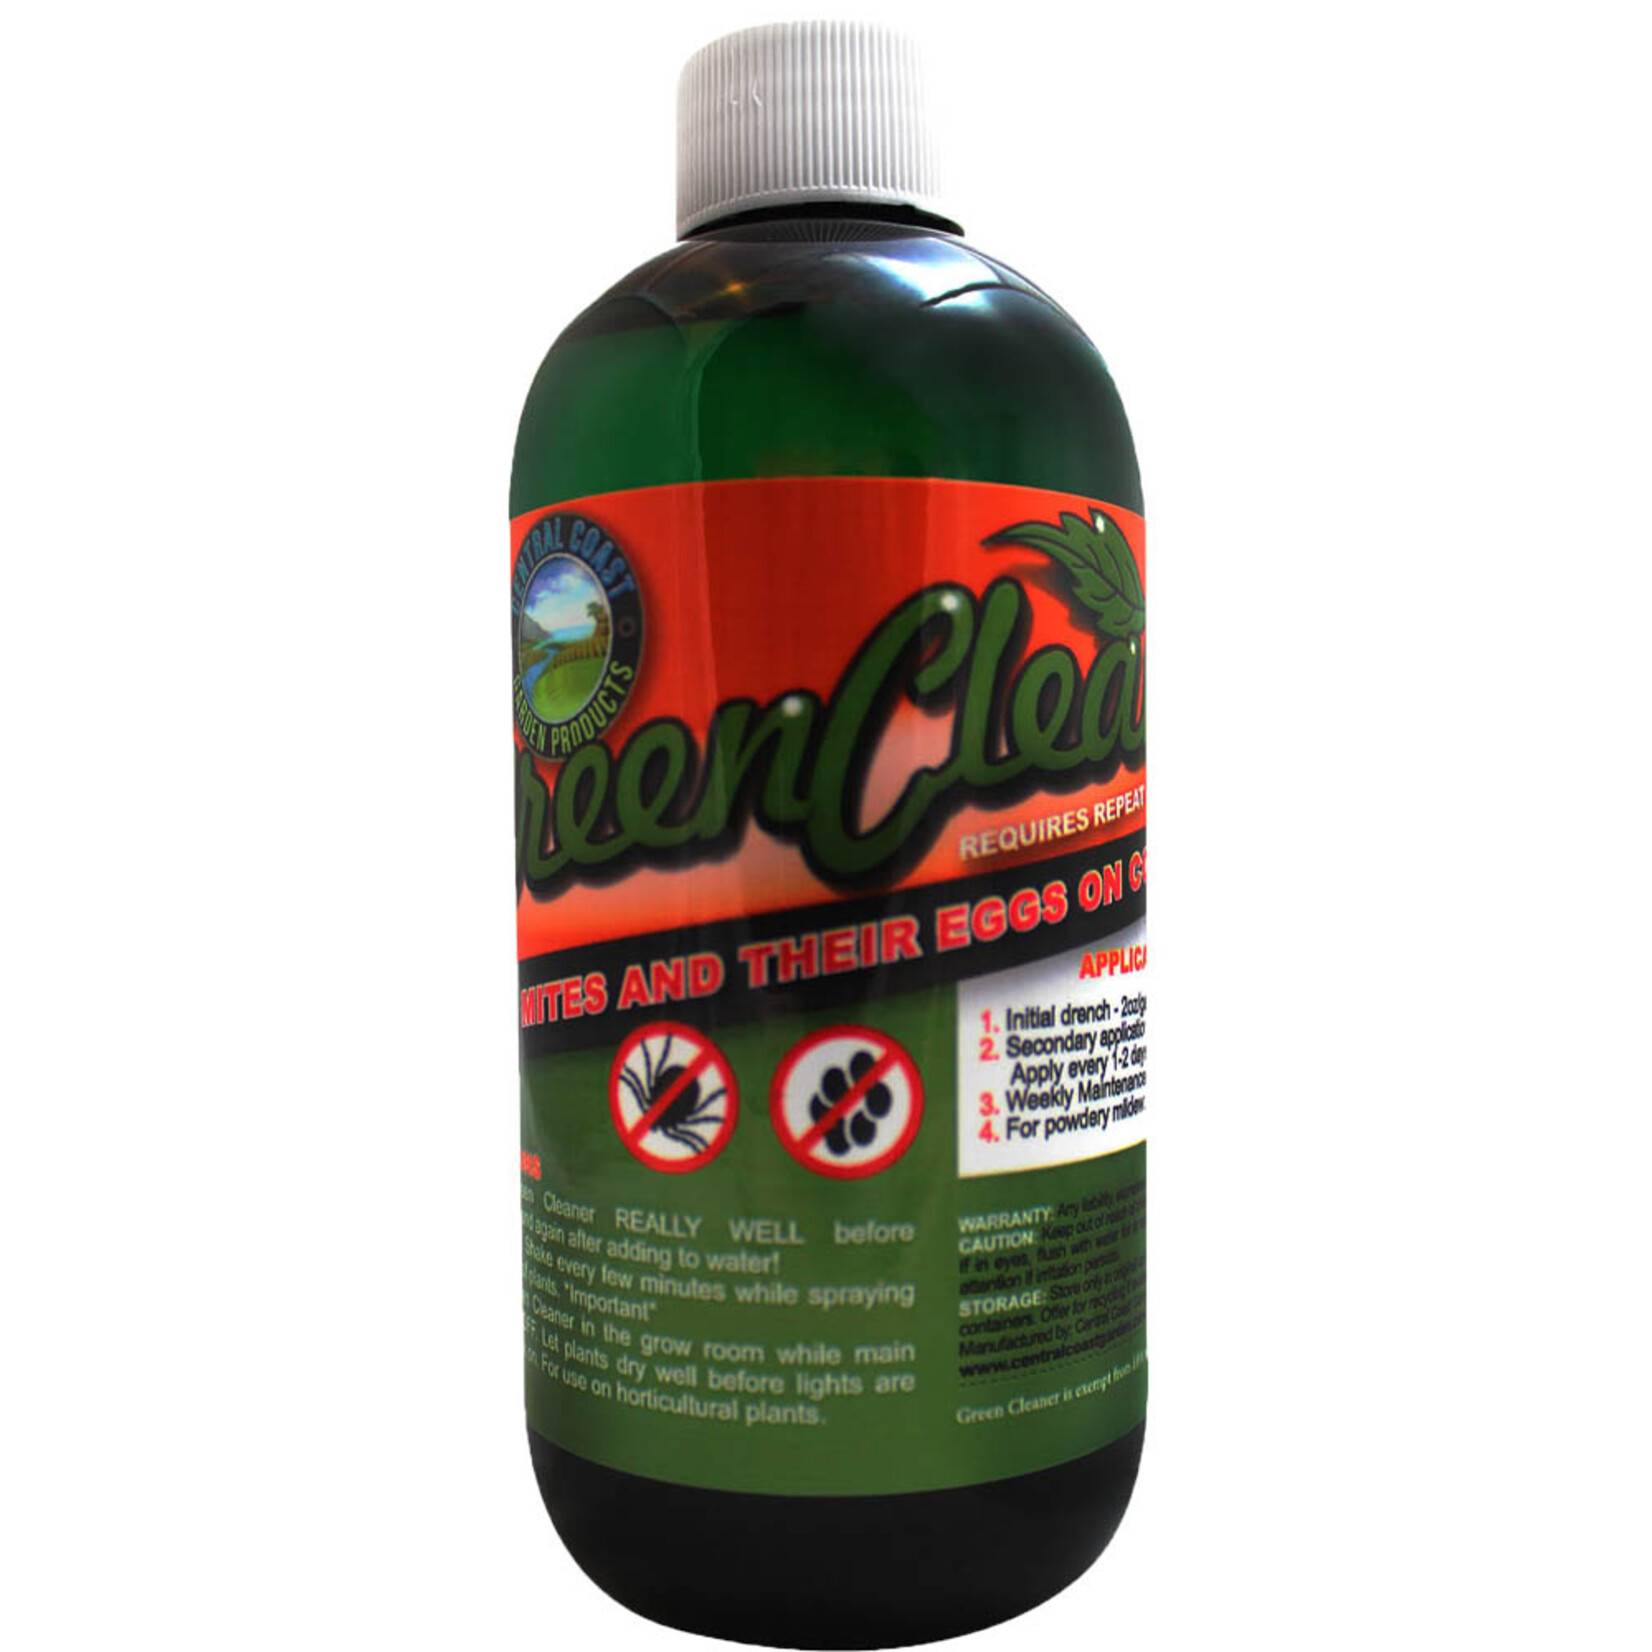 Central Coast Garden Products Green Cleaner, 8 oz